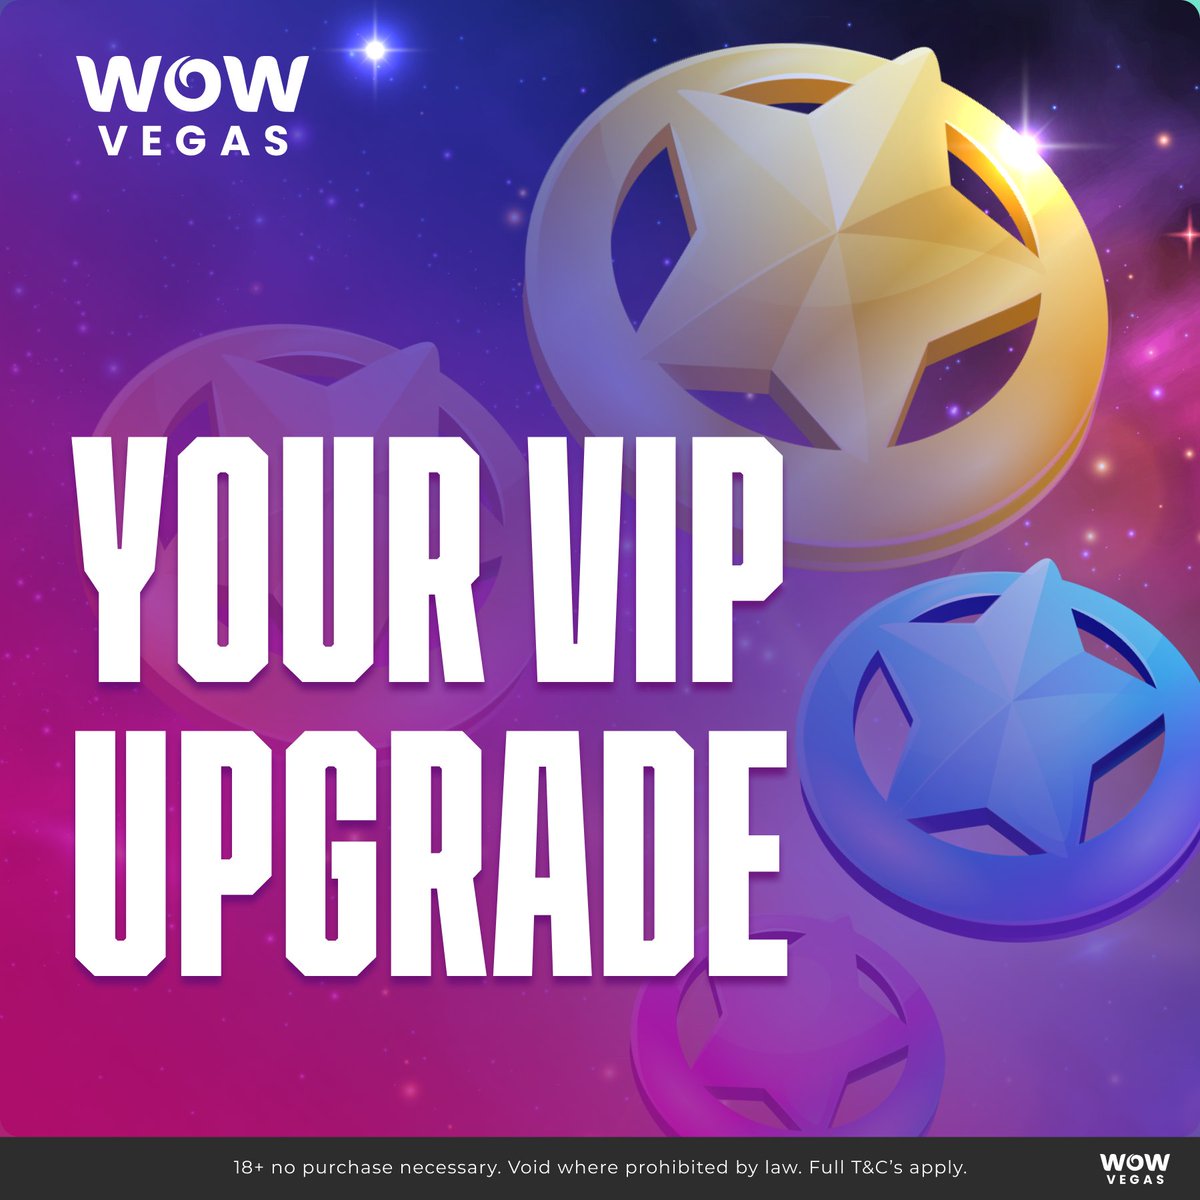 We are thrilled to see just how many of you have applied to transfer your VIP status to WOW Vegas 🤩 We love how much you love WOW Vegas and we are working hard 24/7 to get all the upgrades completed. Please bear with us whilst we process your upgrades asap! 🙏🏻